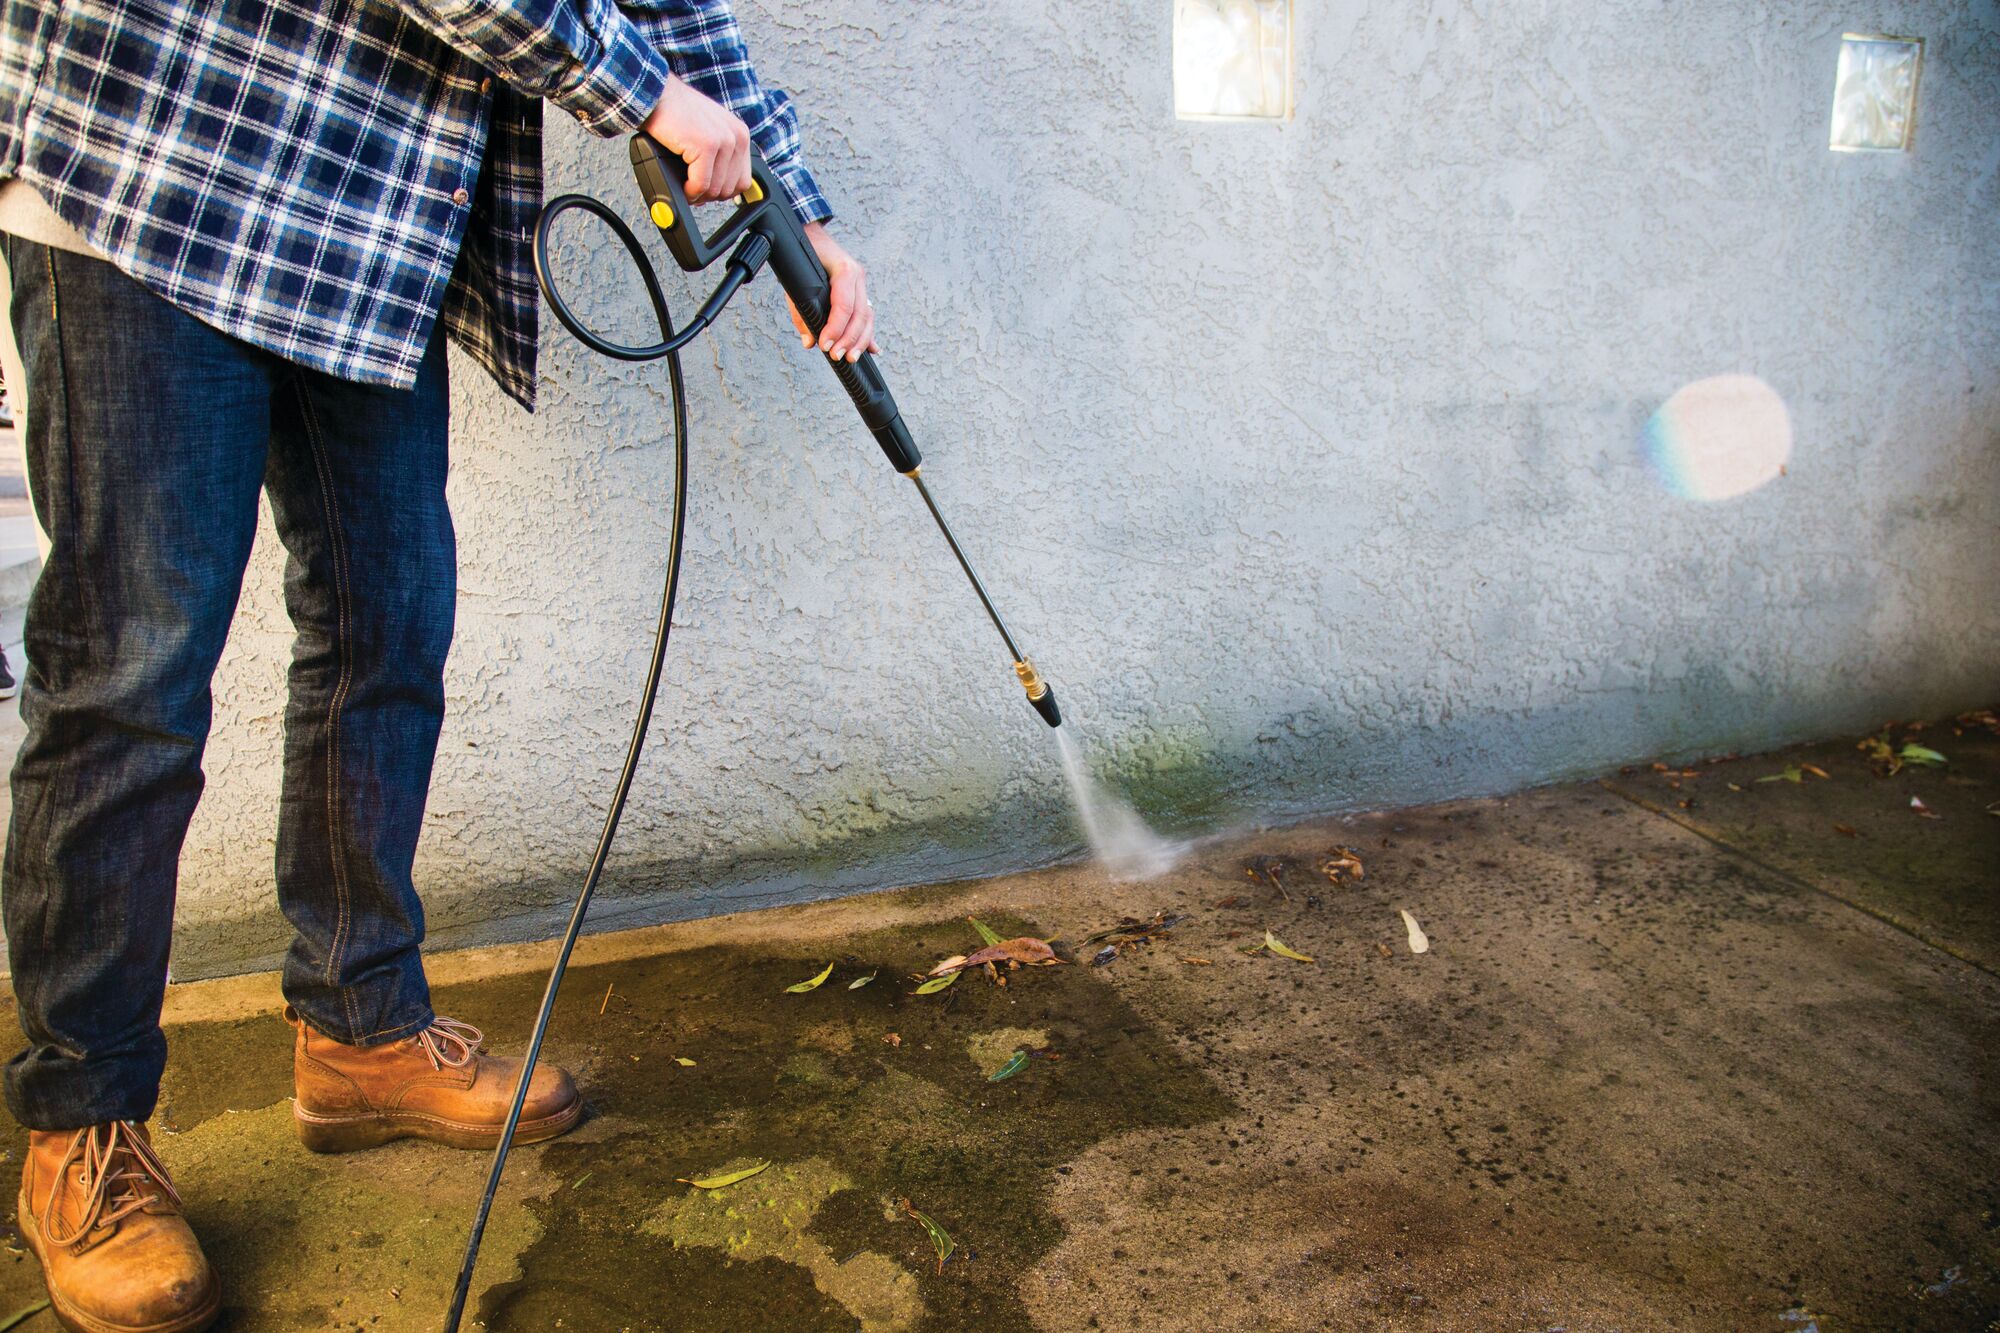 2150 P S I ELECTRIC PRESSURE WASHER being used to clean.